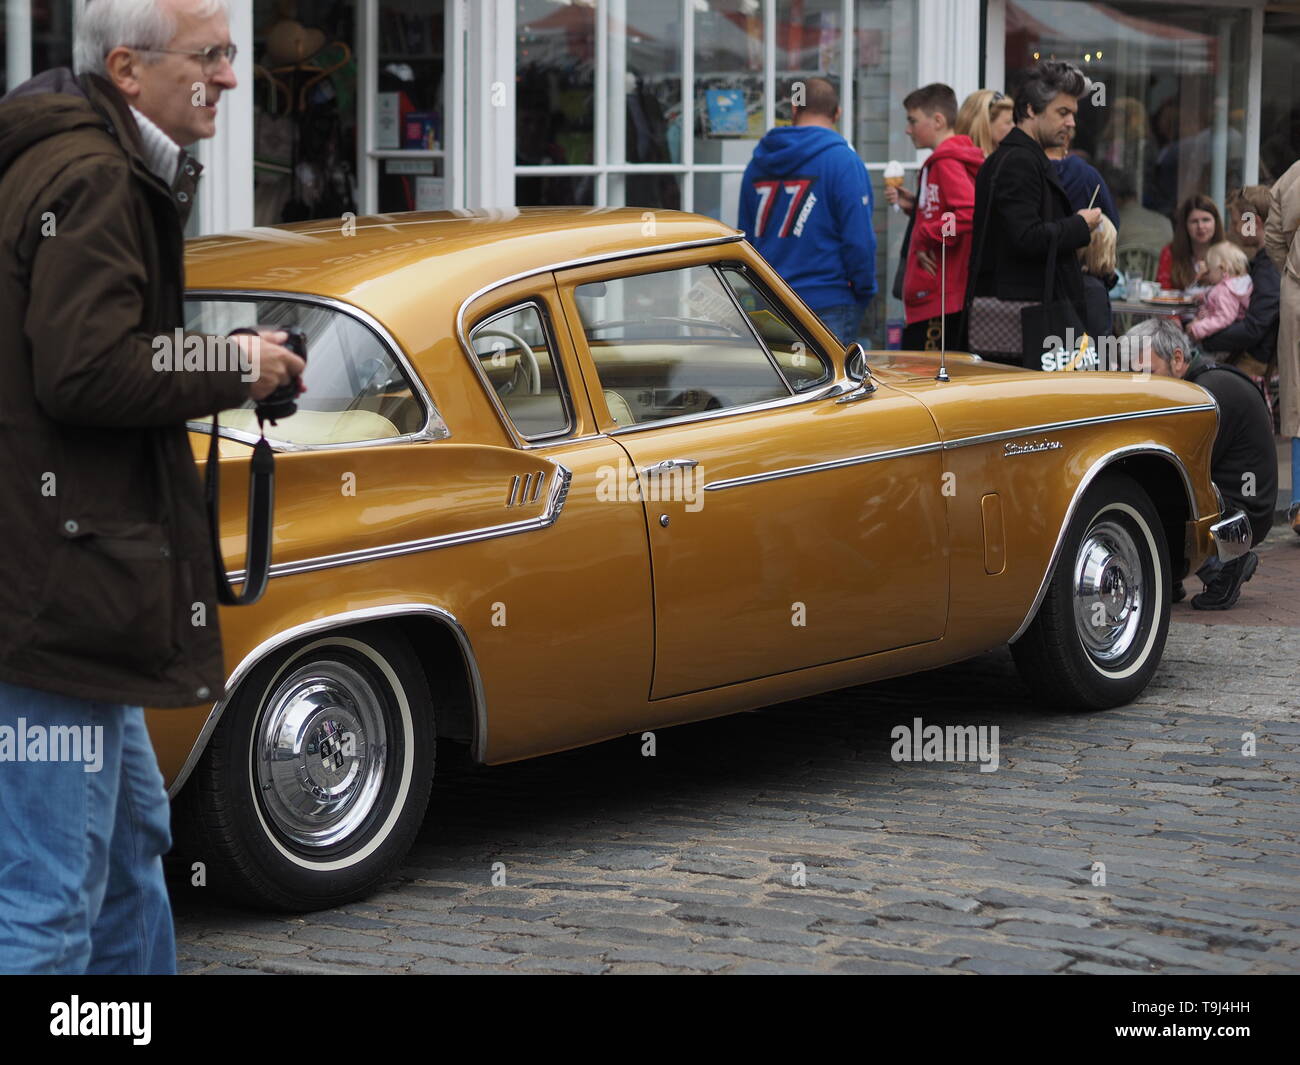 Faversham, Kent, UK. 19th May, 2019. 25th Faversham Transport Weekend: the second day of this annual transport festival now in its 25th year showcasing a wide range of vintage cars and vehicles. Pic: a 1960 Studebaker Gold Hawk. Credit: James Bell/Alamy Live News Stock Photo